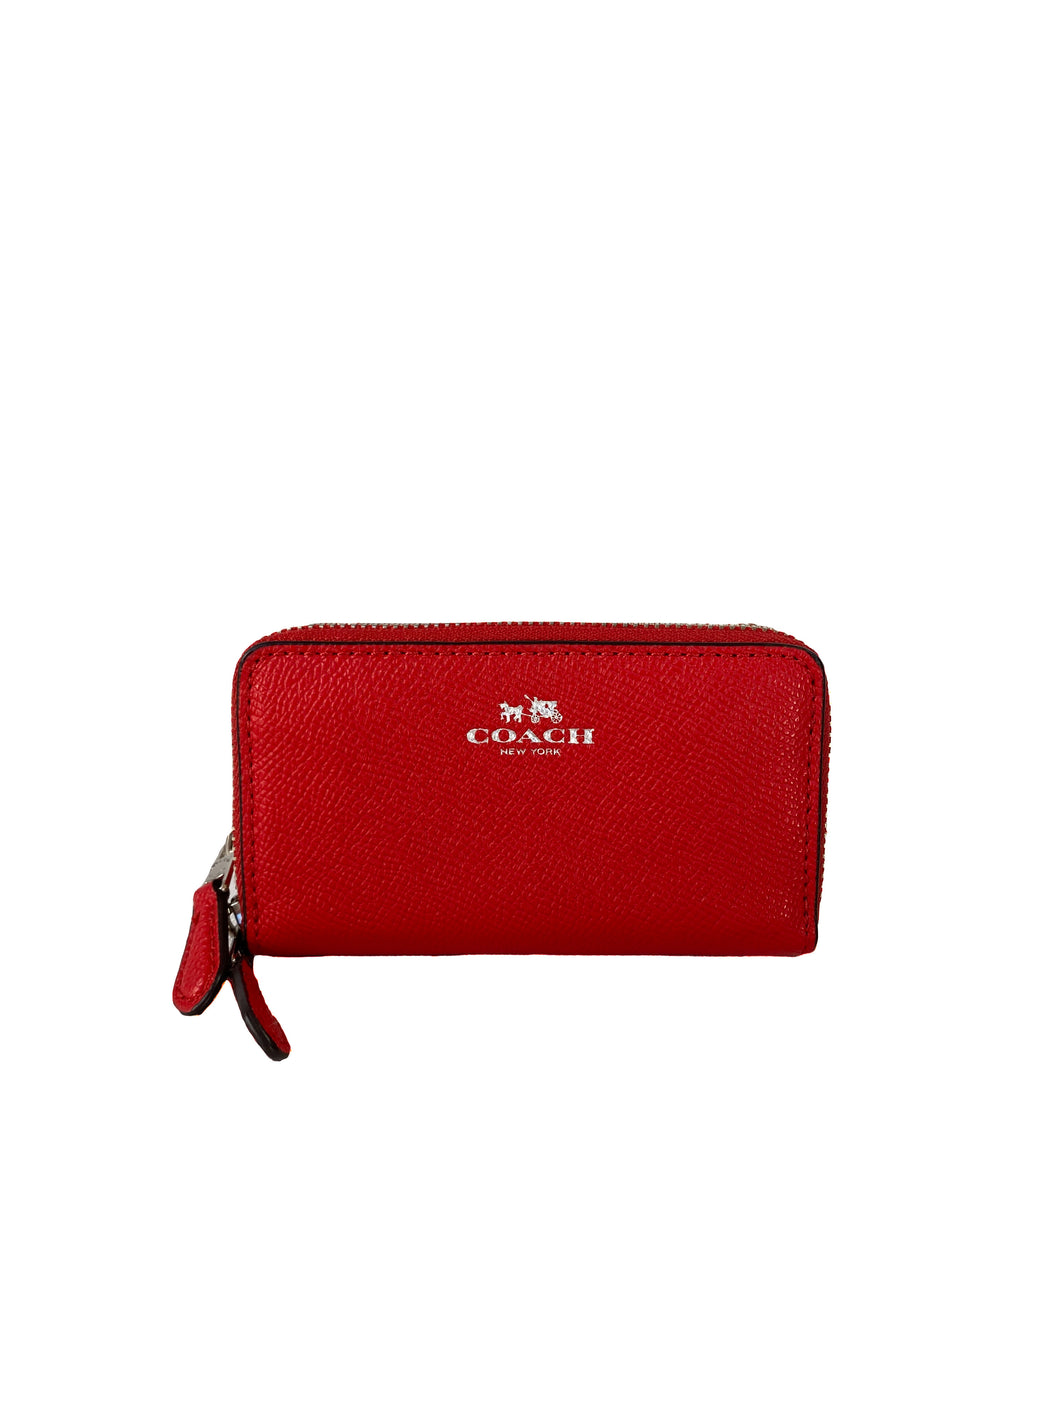 Coach red double zip wallet NWT